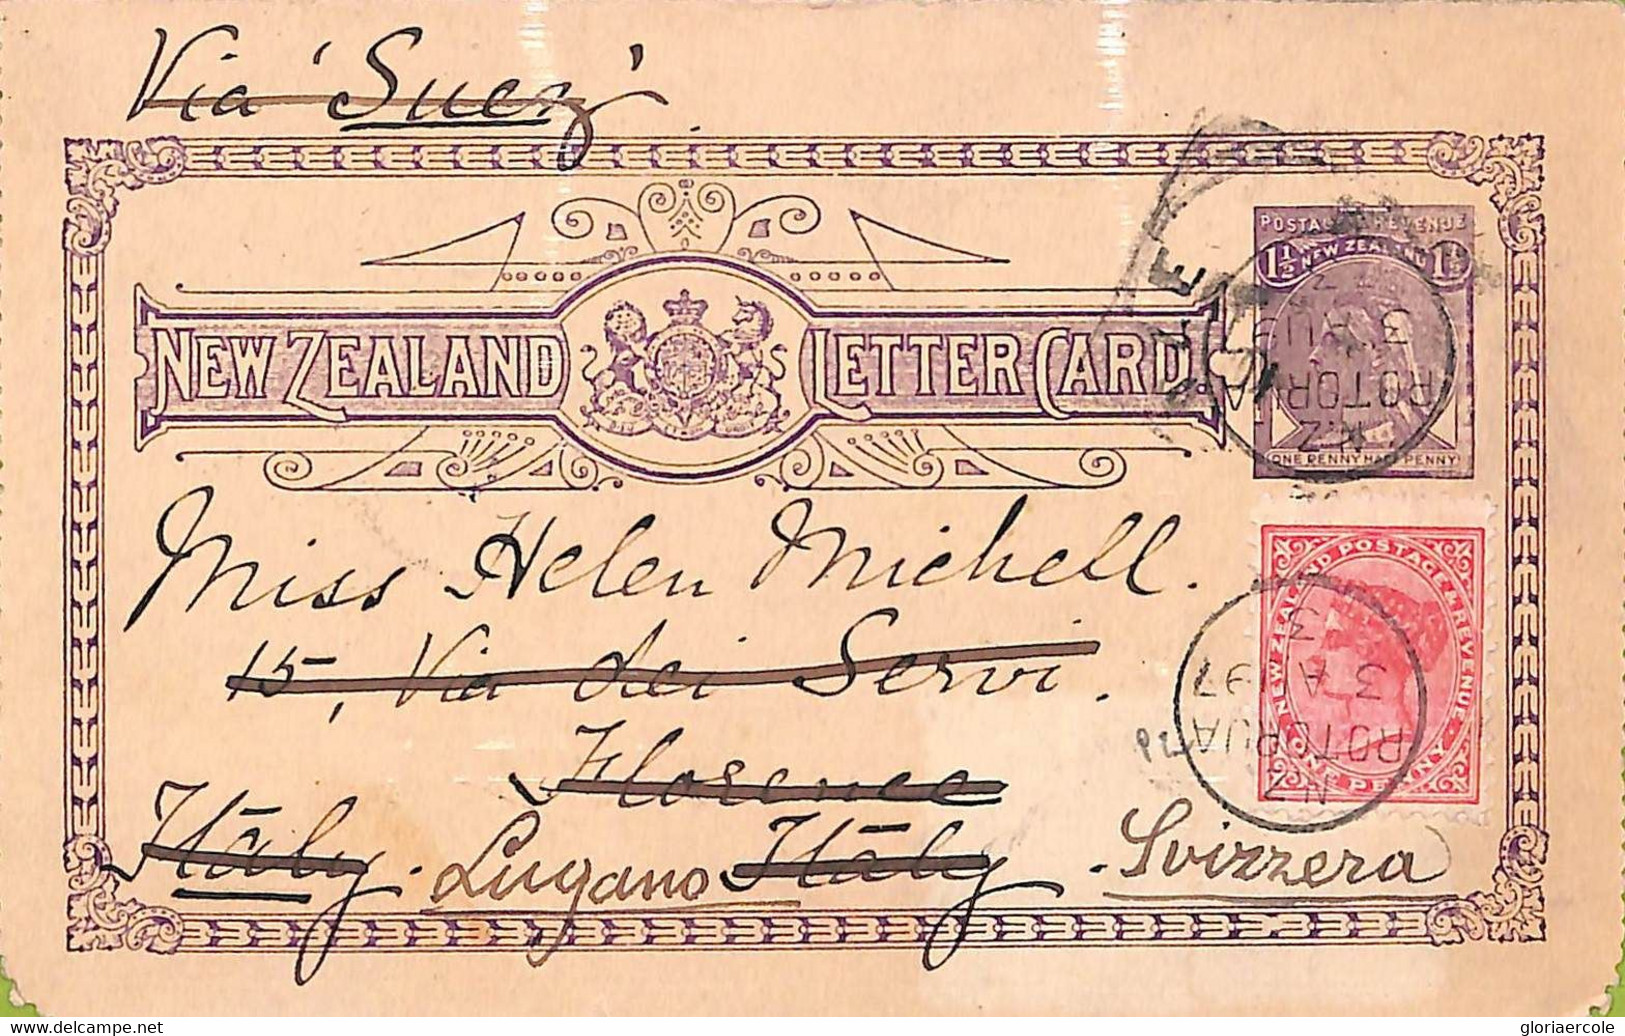 Ac6686 - NEW ZEALAND - POSTAL HISTORY - STATIONERY Letter Card To ITALY 1897 - Covers & Documents